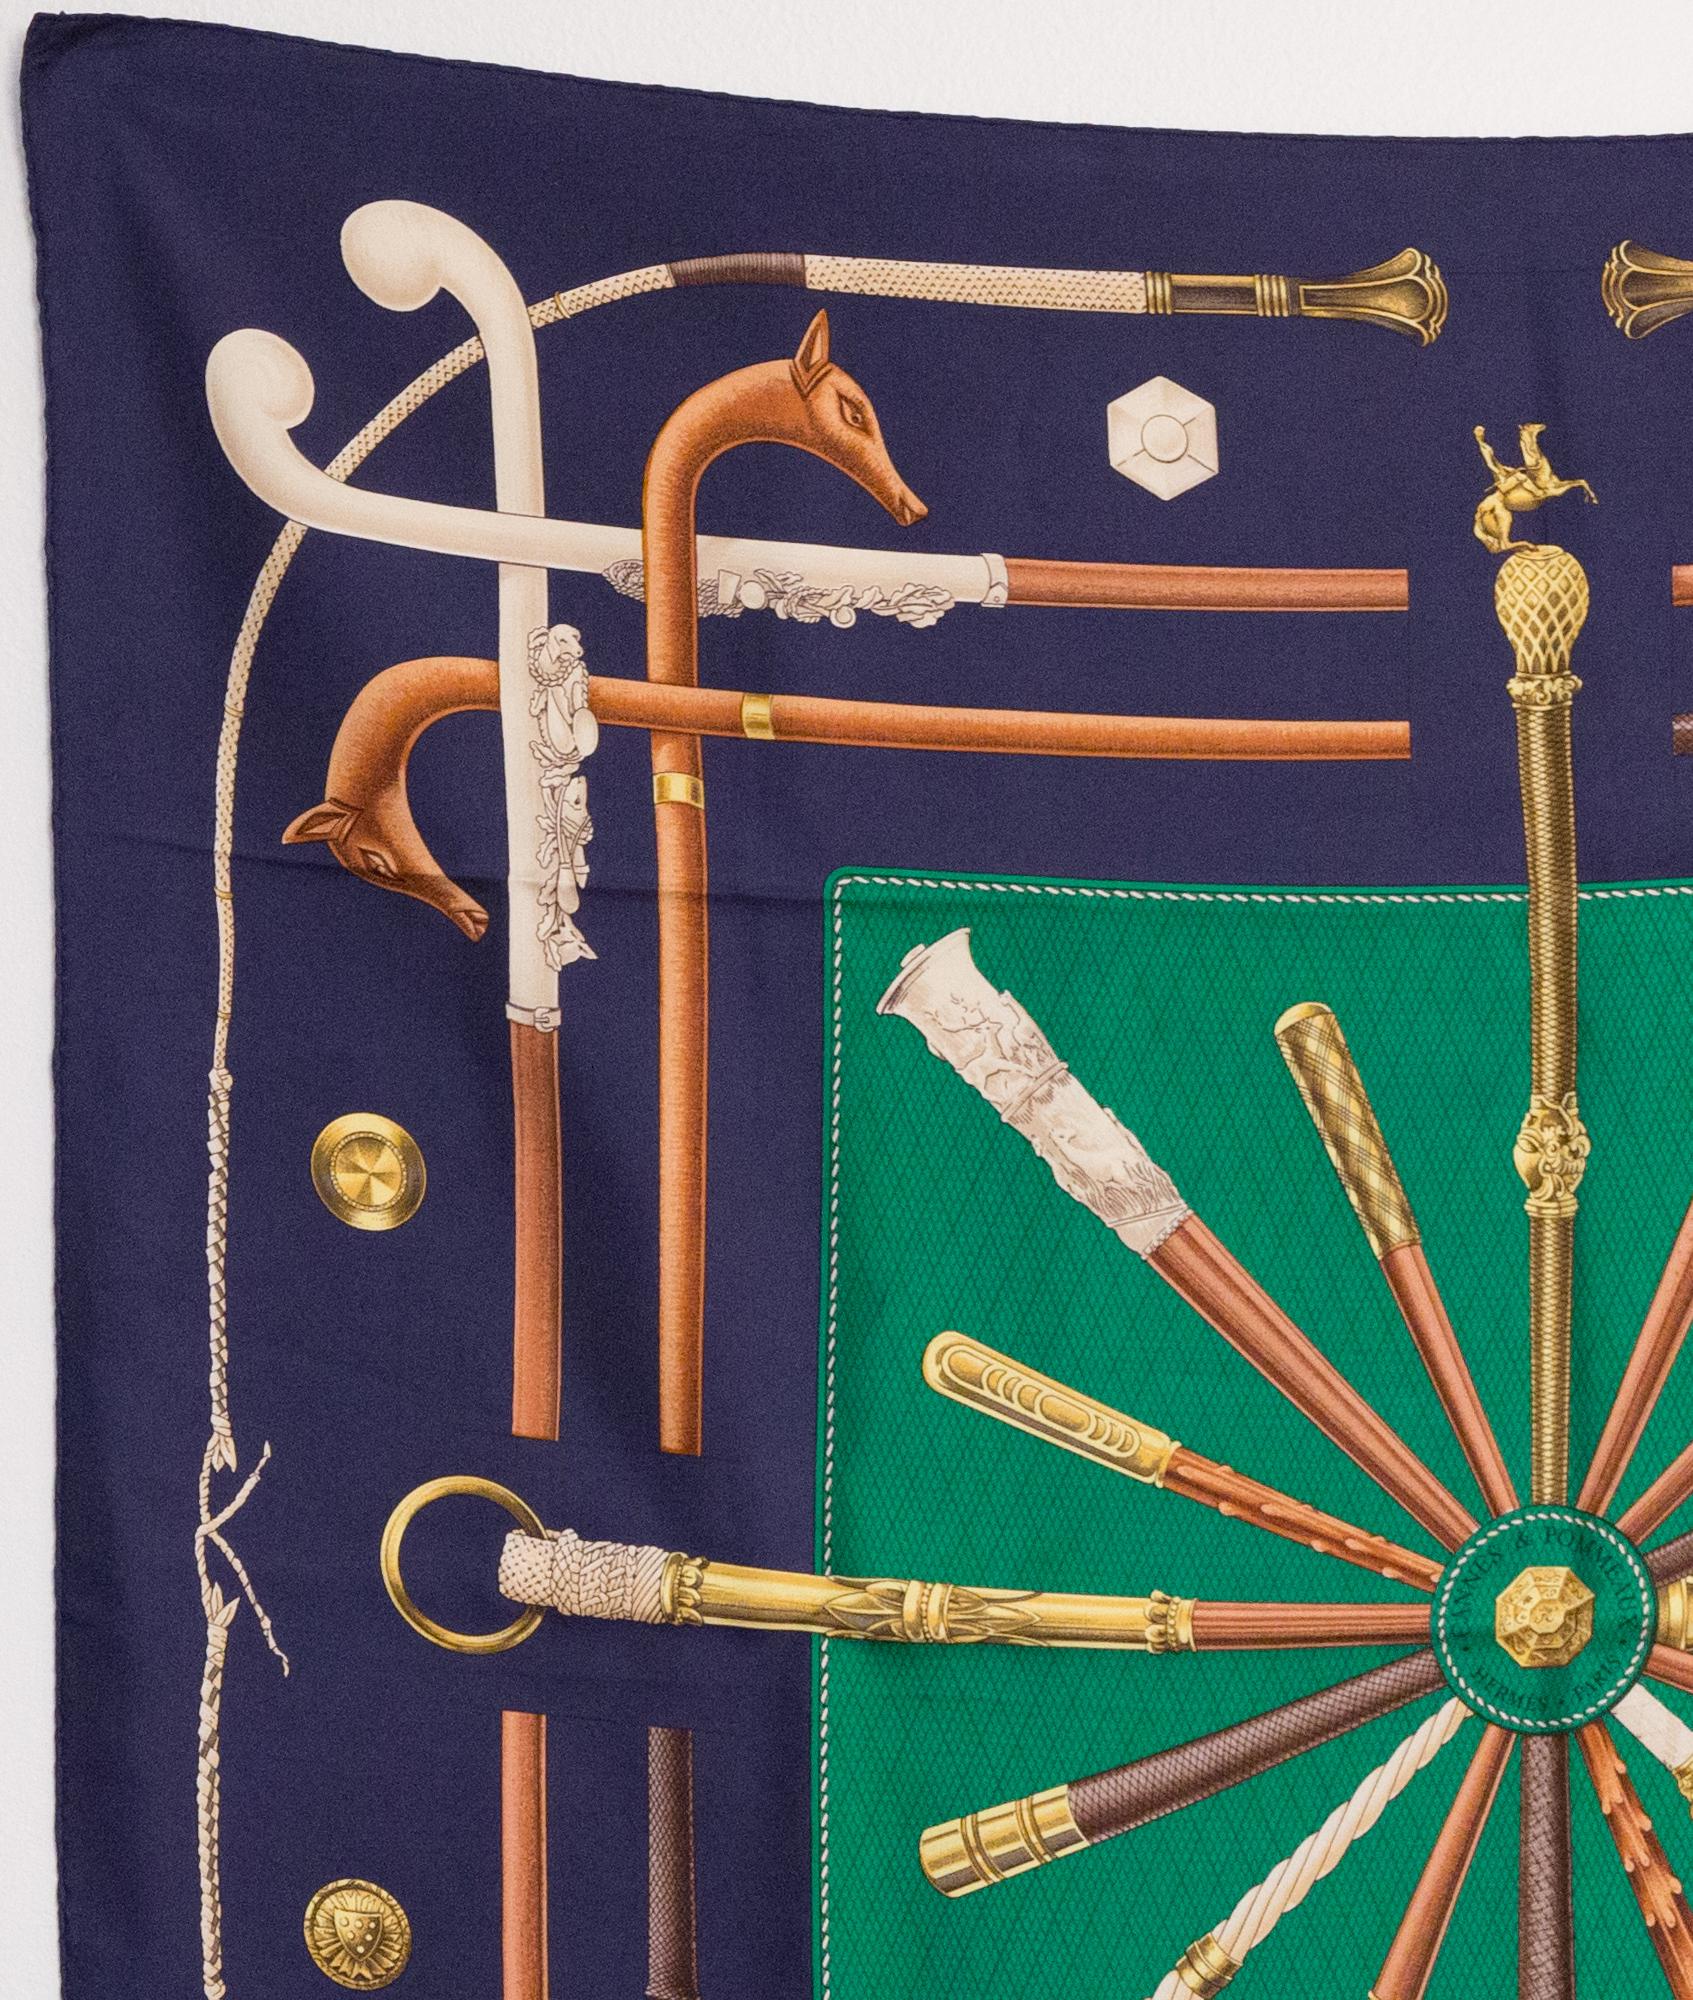 Hermes silk scarf Cannes et Pommeaux by F de la Perriere featuring a navy border, a green center and a Hermès signature. .
The Cannes et Pommeaux was created in 1985.
In good vintage condition. Made in France.
35,4in. (90cm)  X 35,4in. (90cm)
We